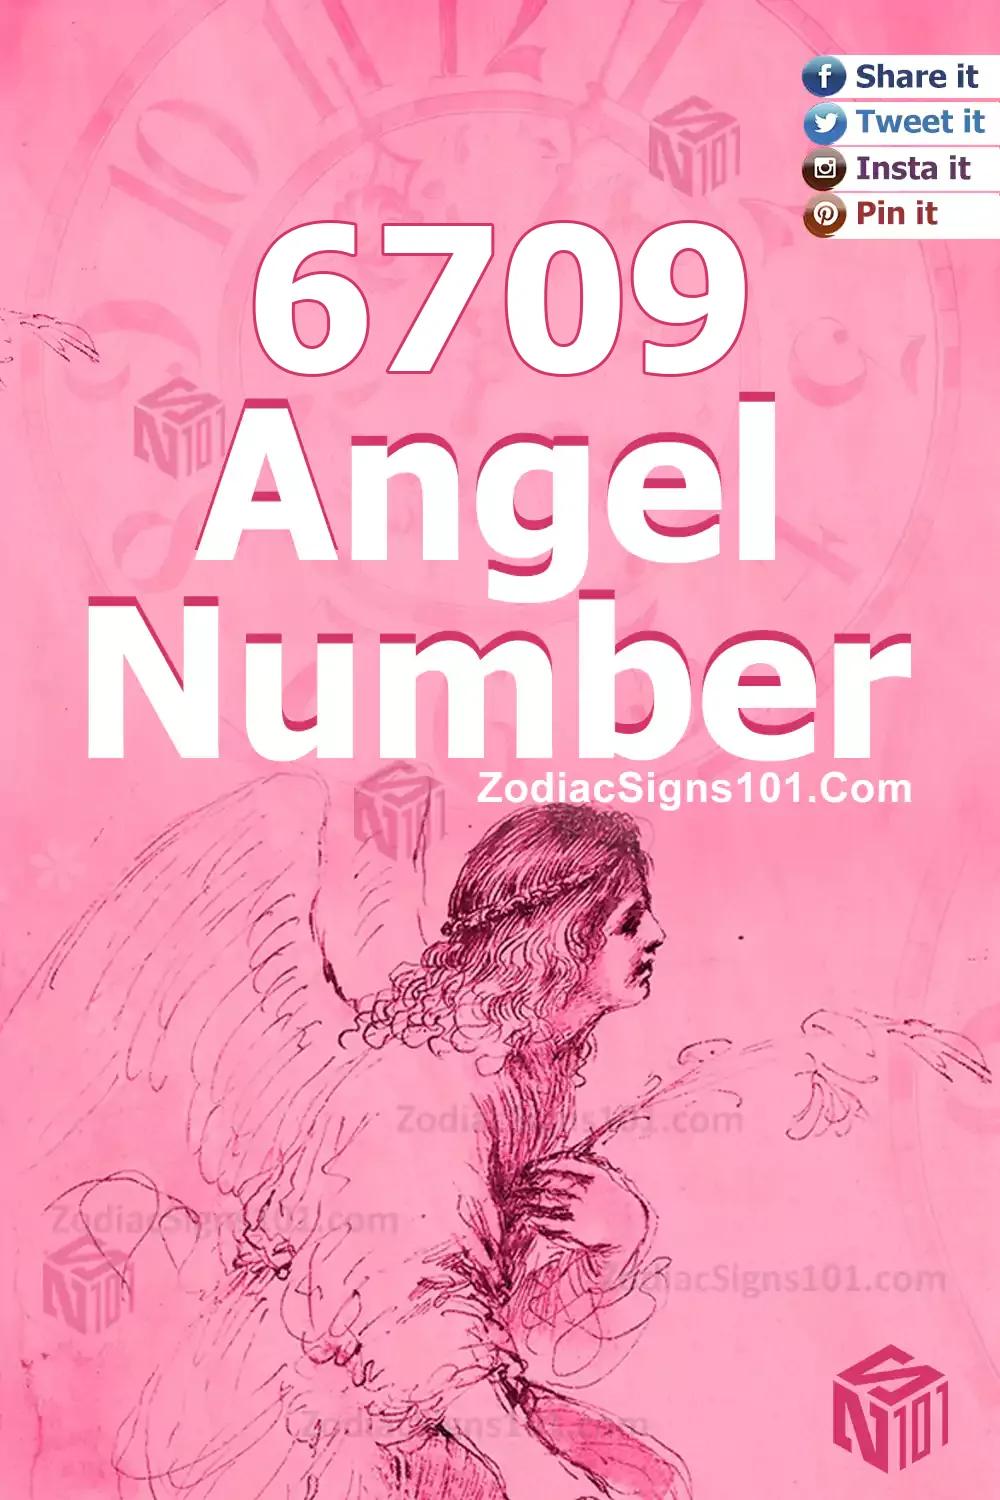 6709 Angel Number Meaning